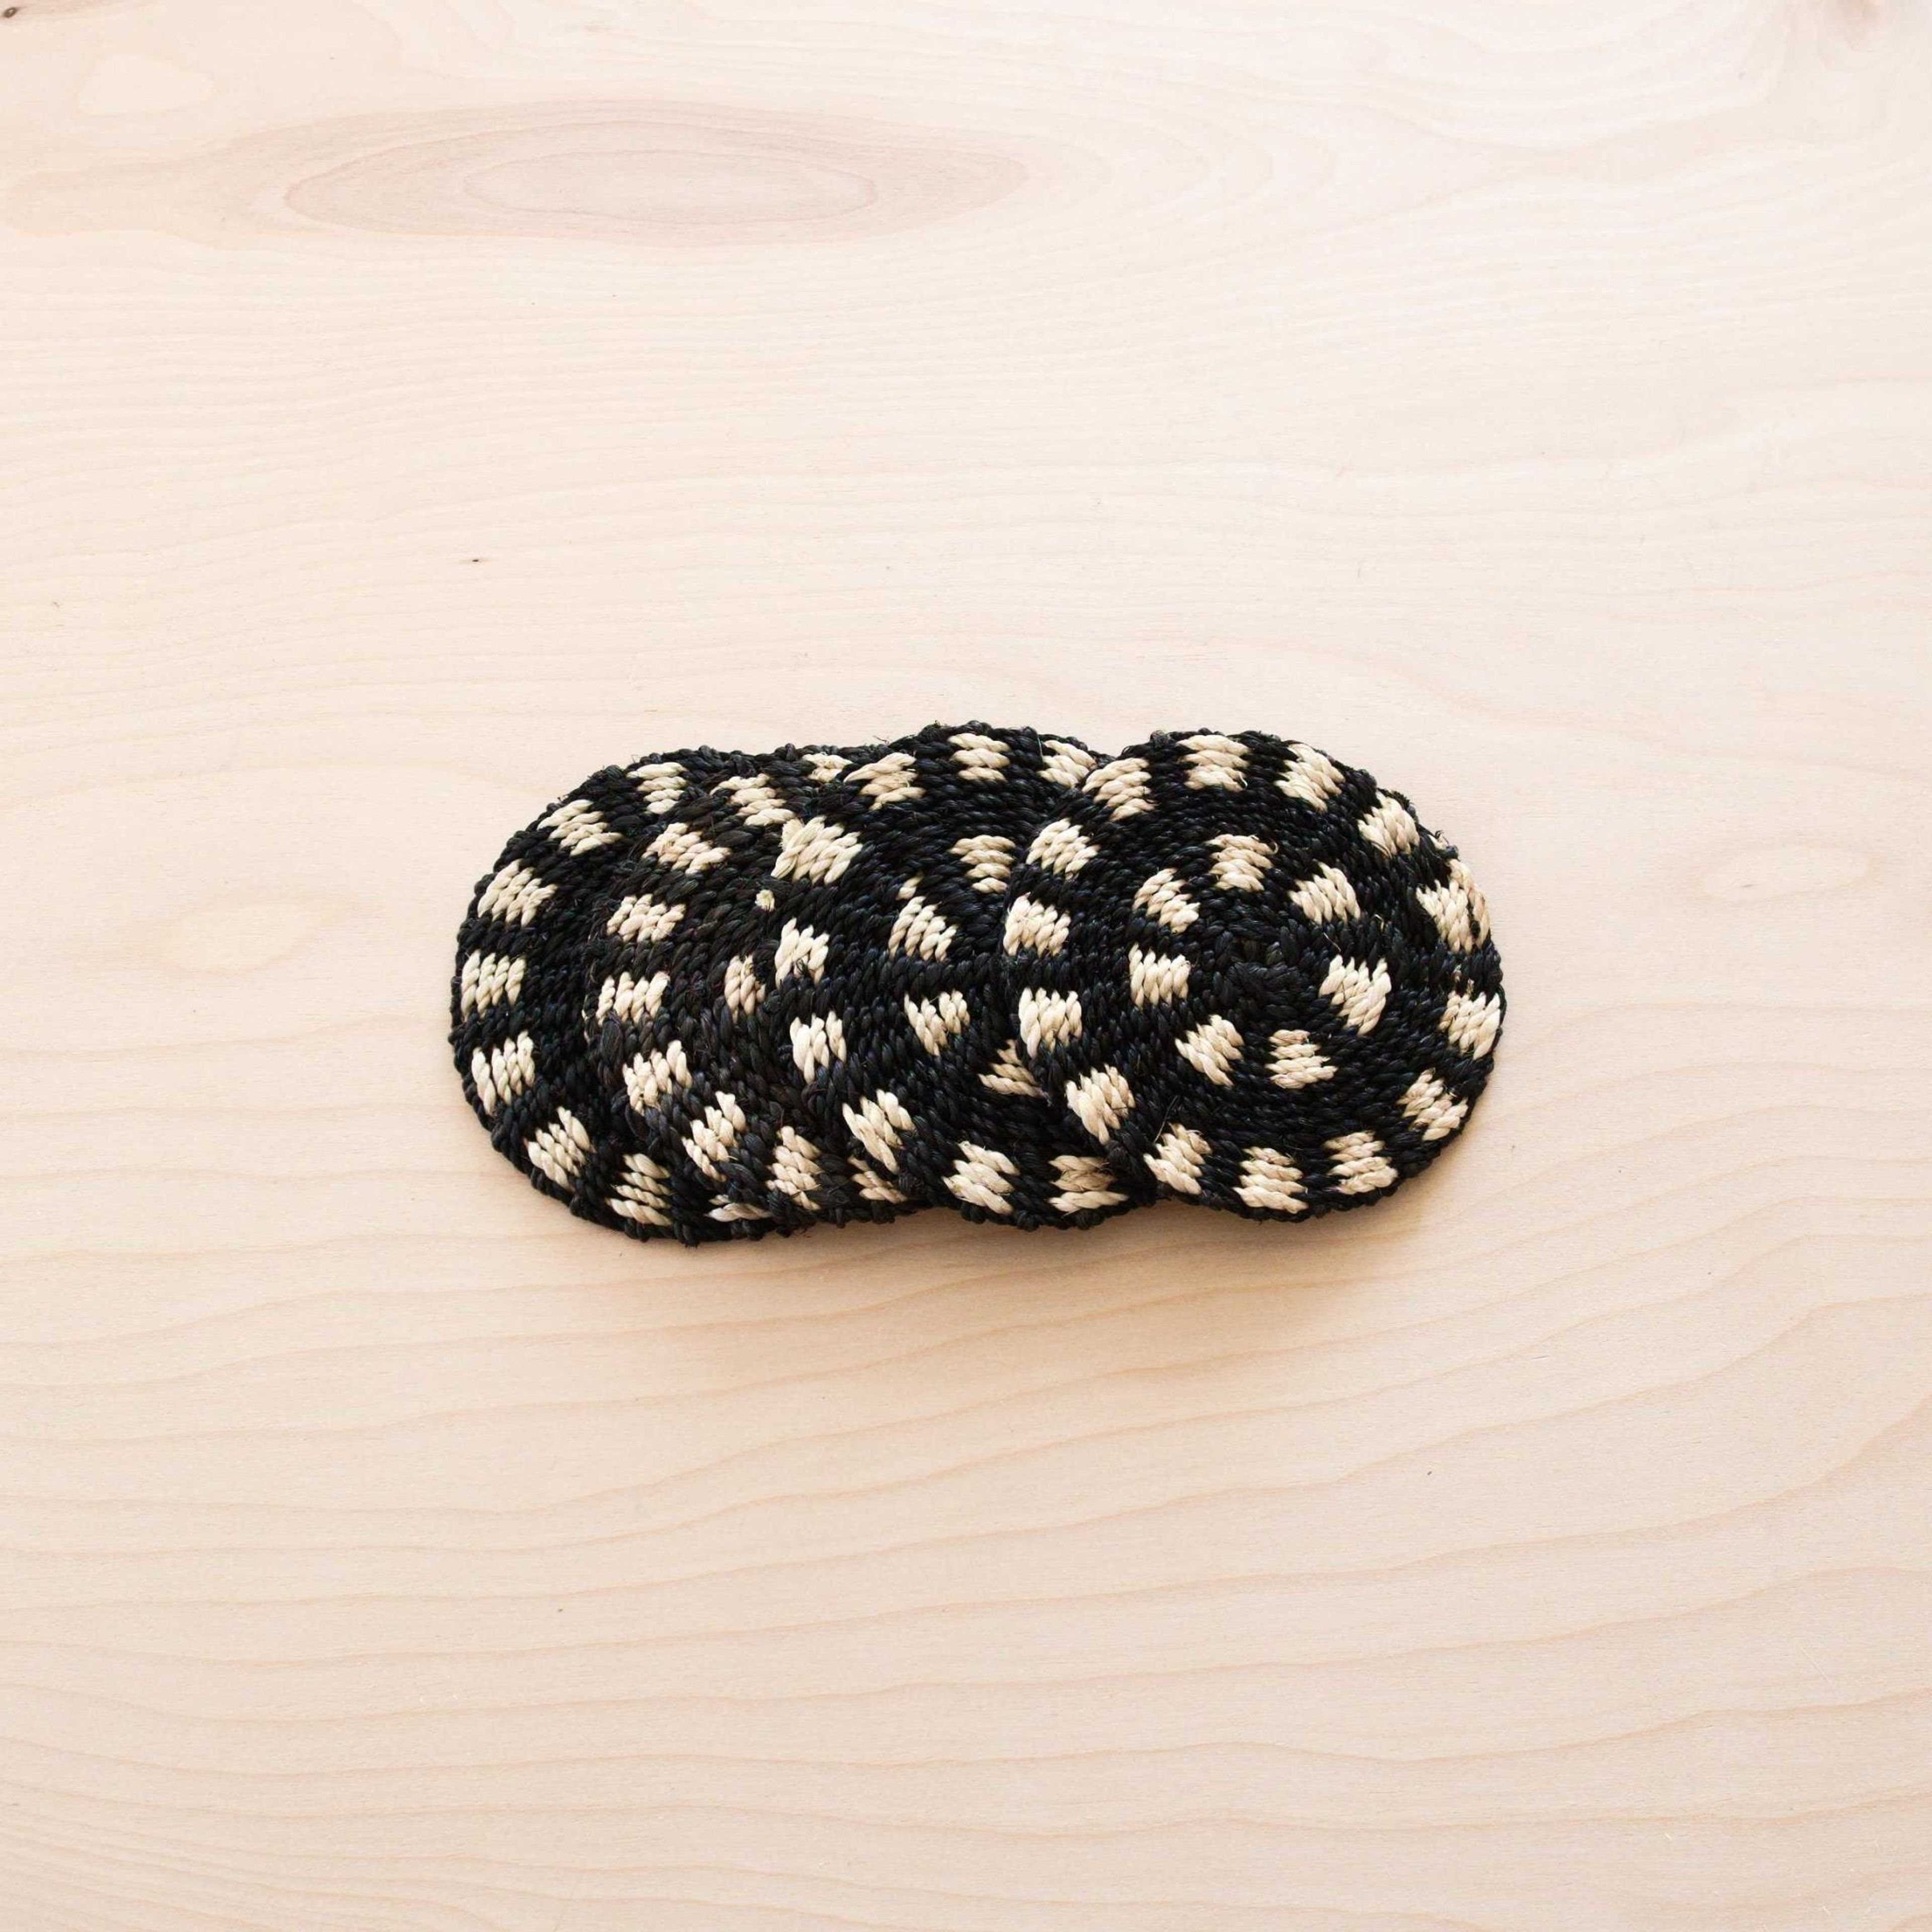 Two-tone Round Braided Coasters, black and white set of 4 - Natural Fiber | LIKHÂ